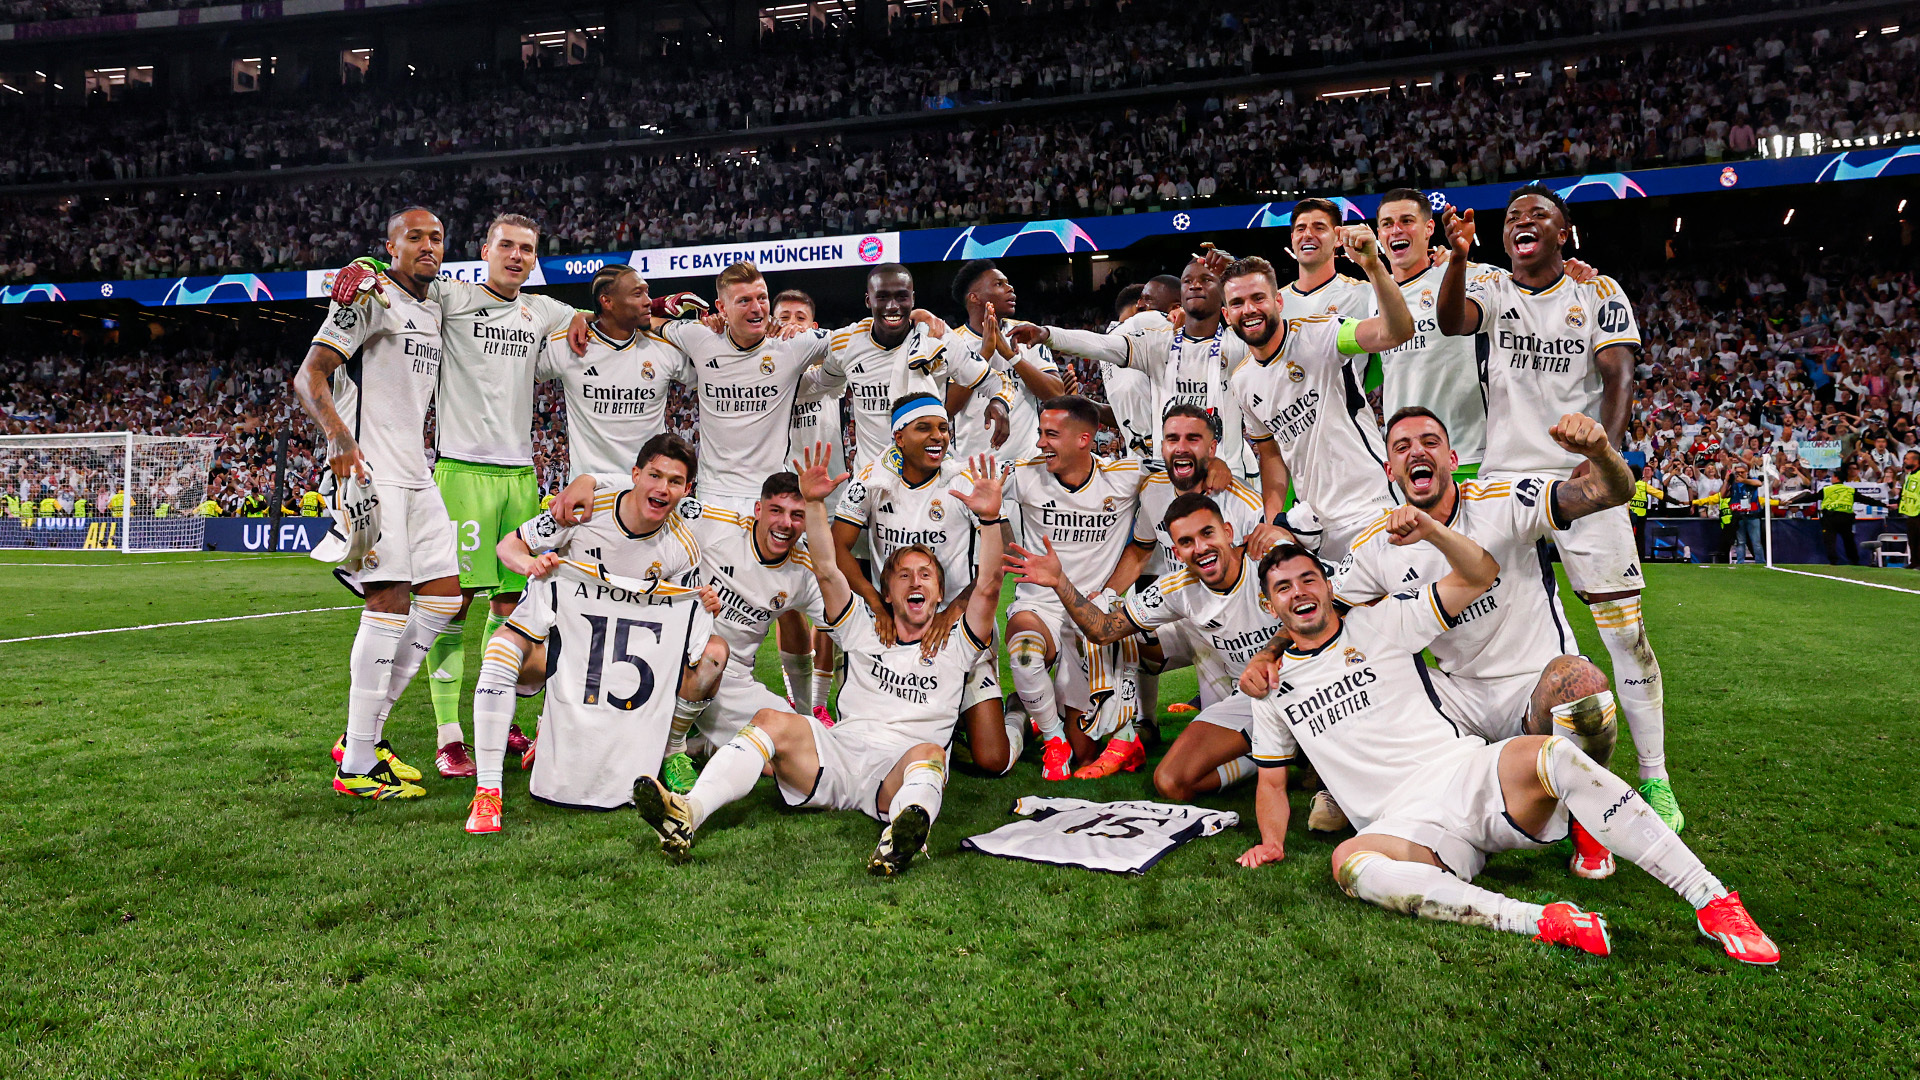 Real Madrid give "magical" comeback to book a place in the Champions